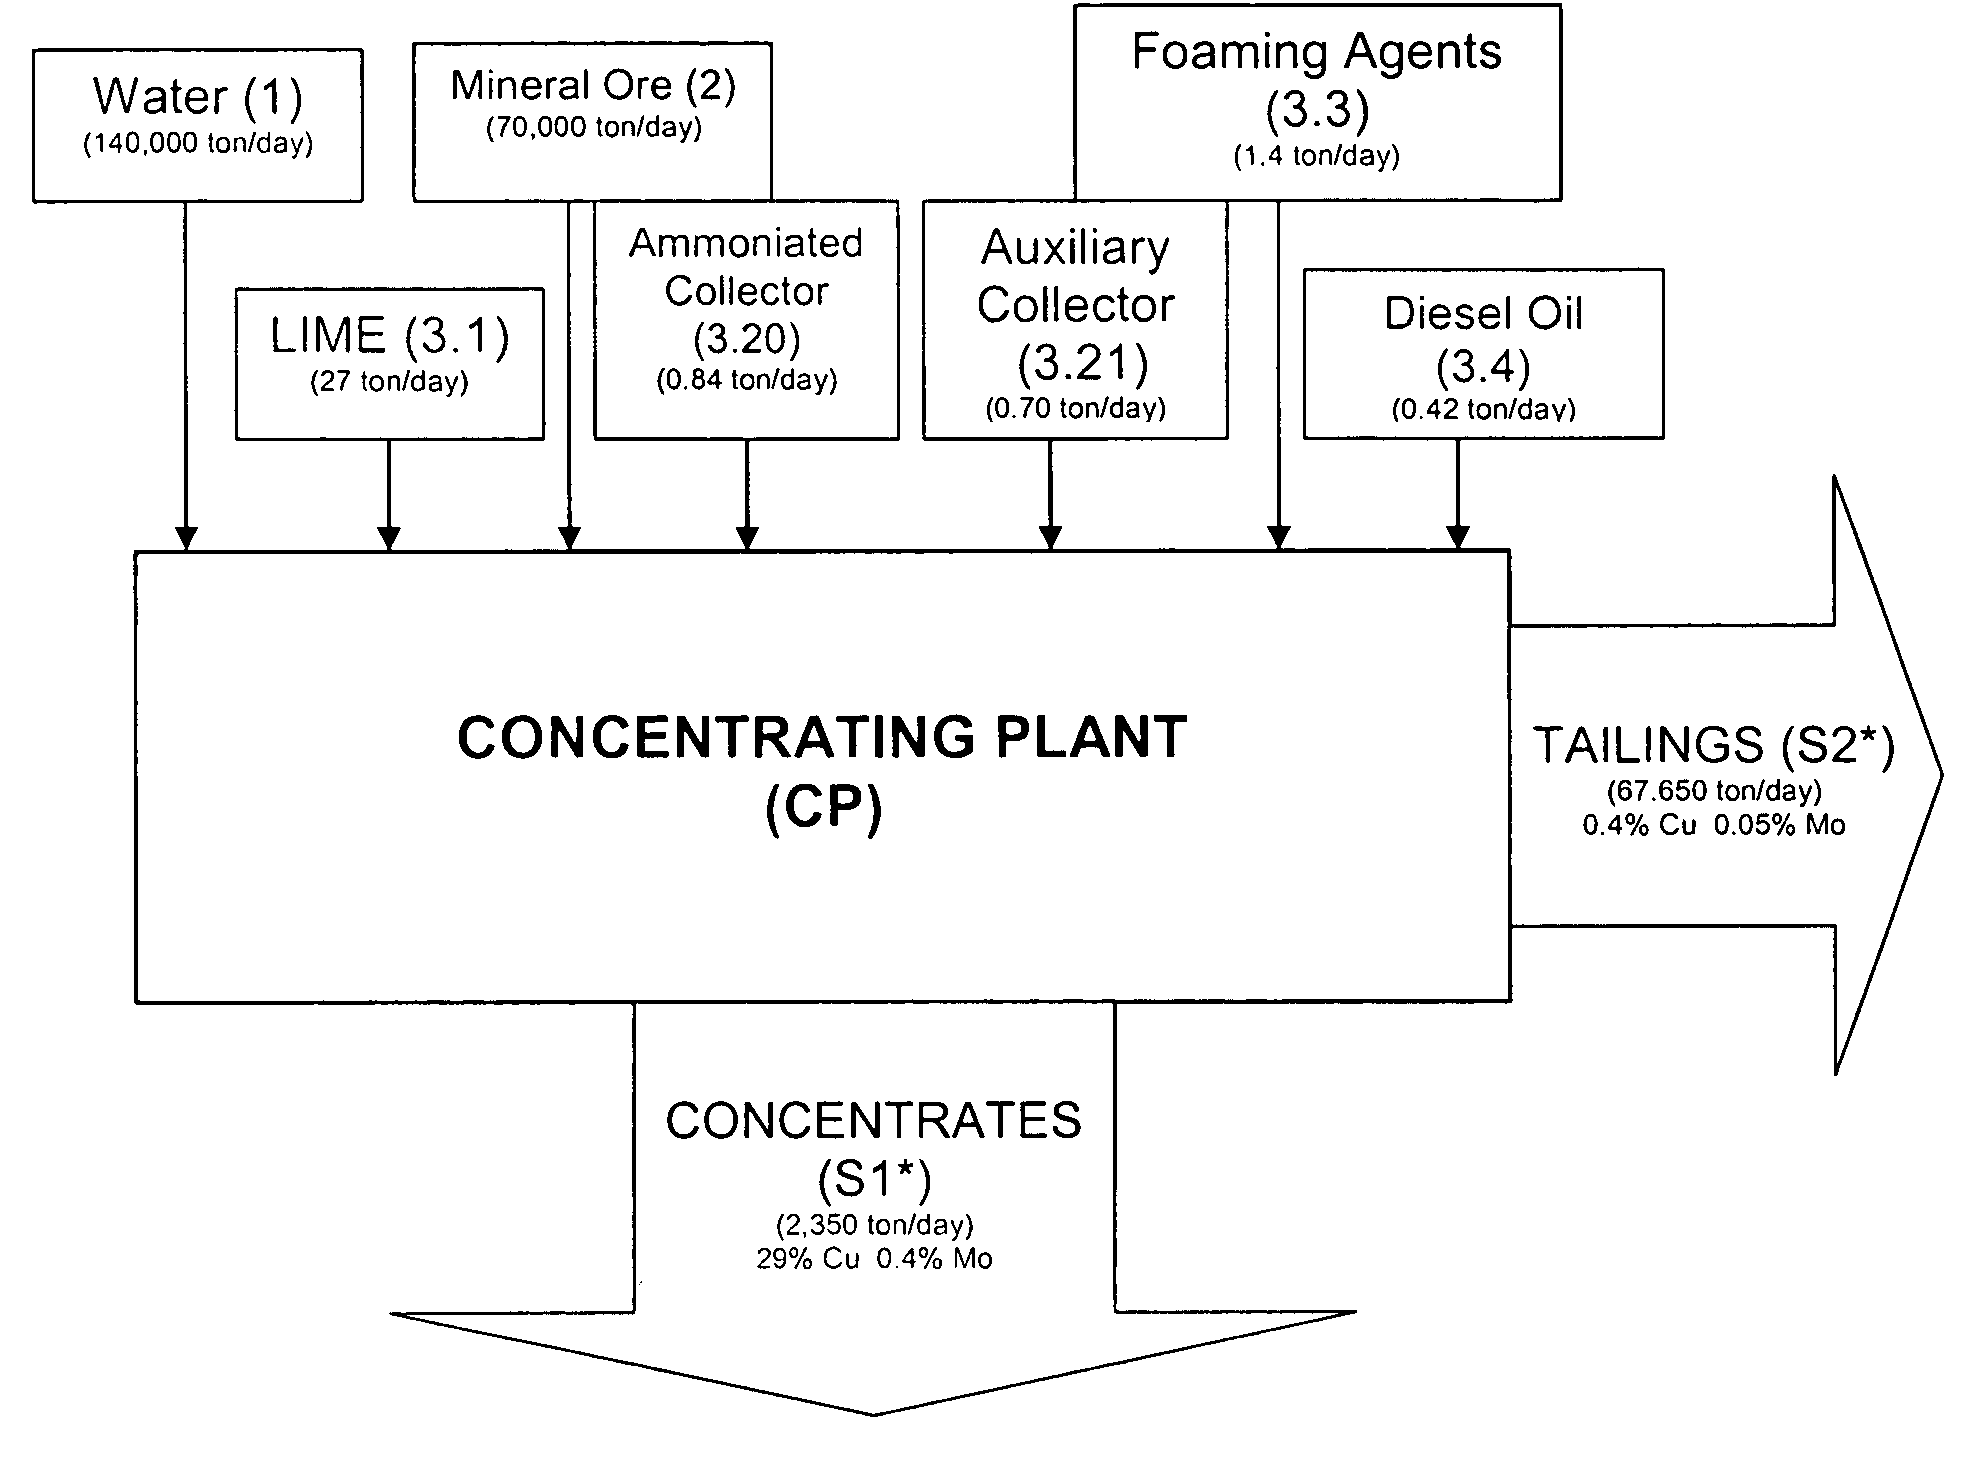 Collecting agent comprising ammoniated compounds (primary, secondary, tertiary amines), for use in the process of grinding and/or floating copper, molybdenum, zinc, and other contained mineral ores